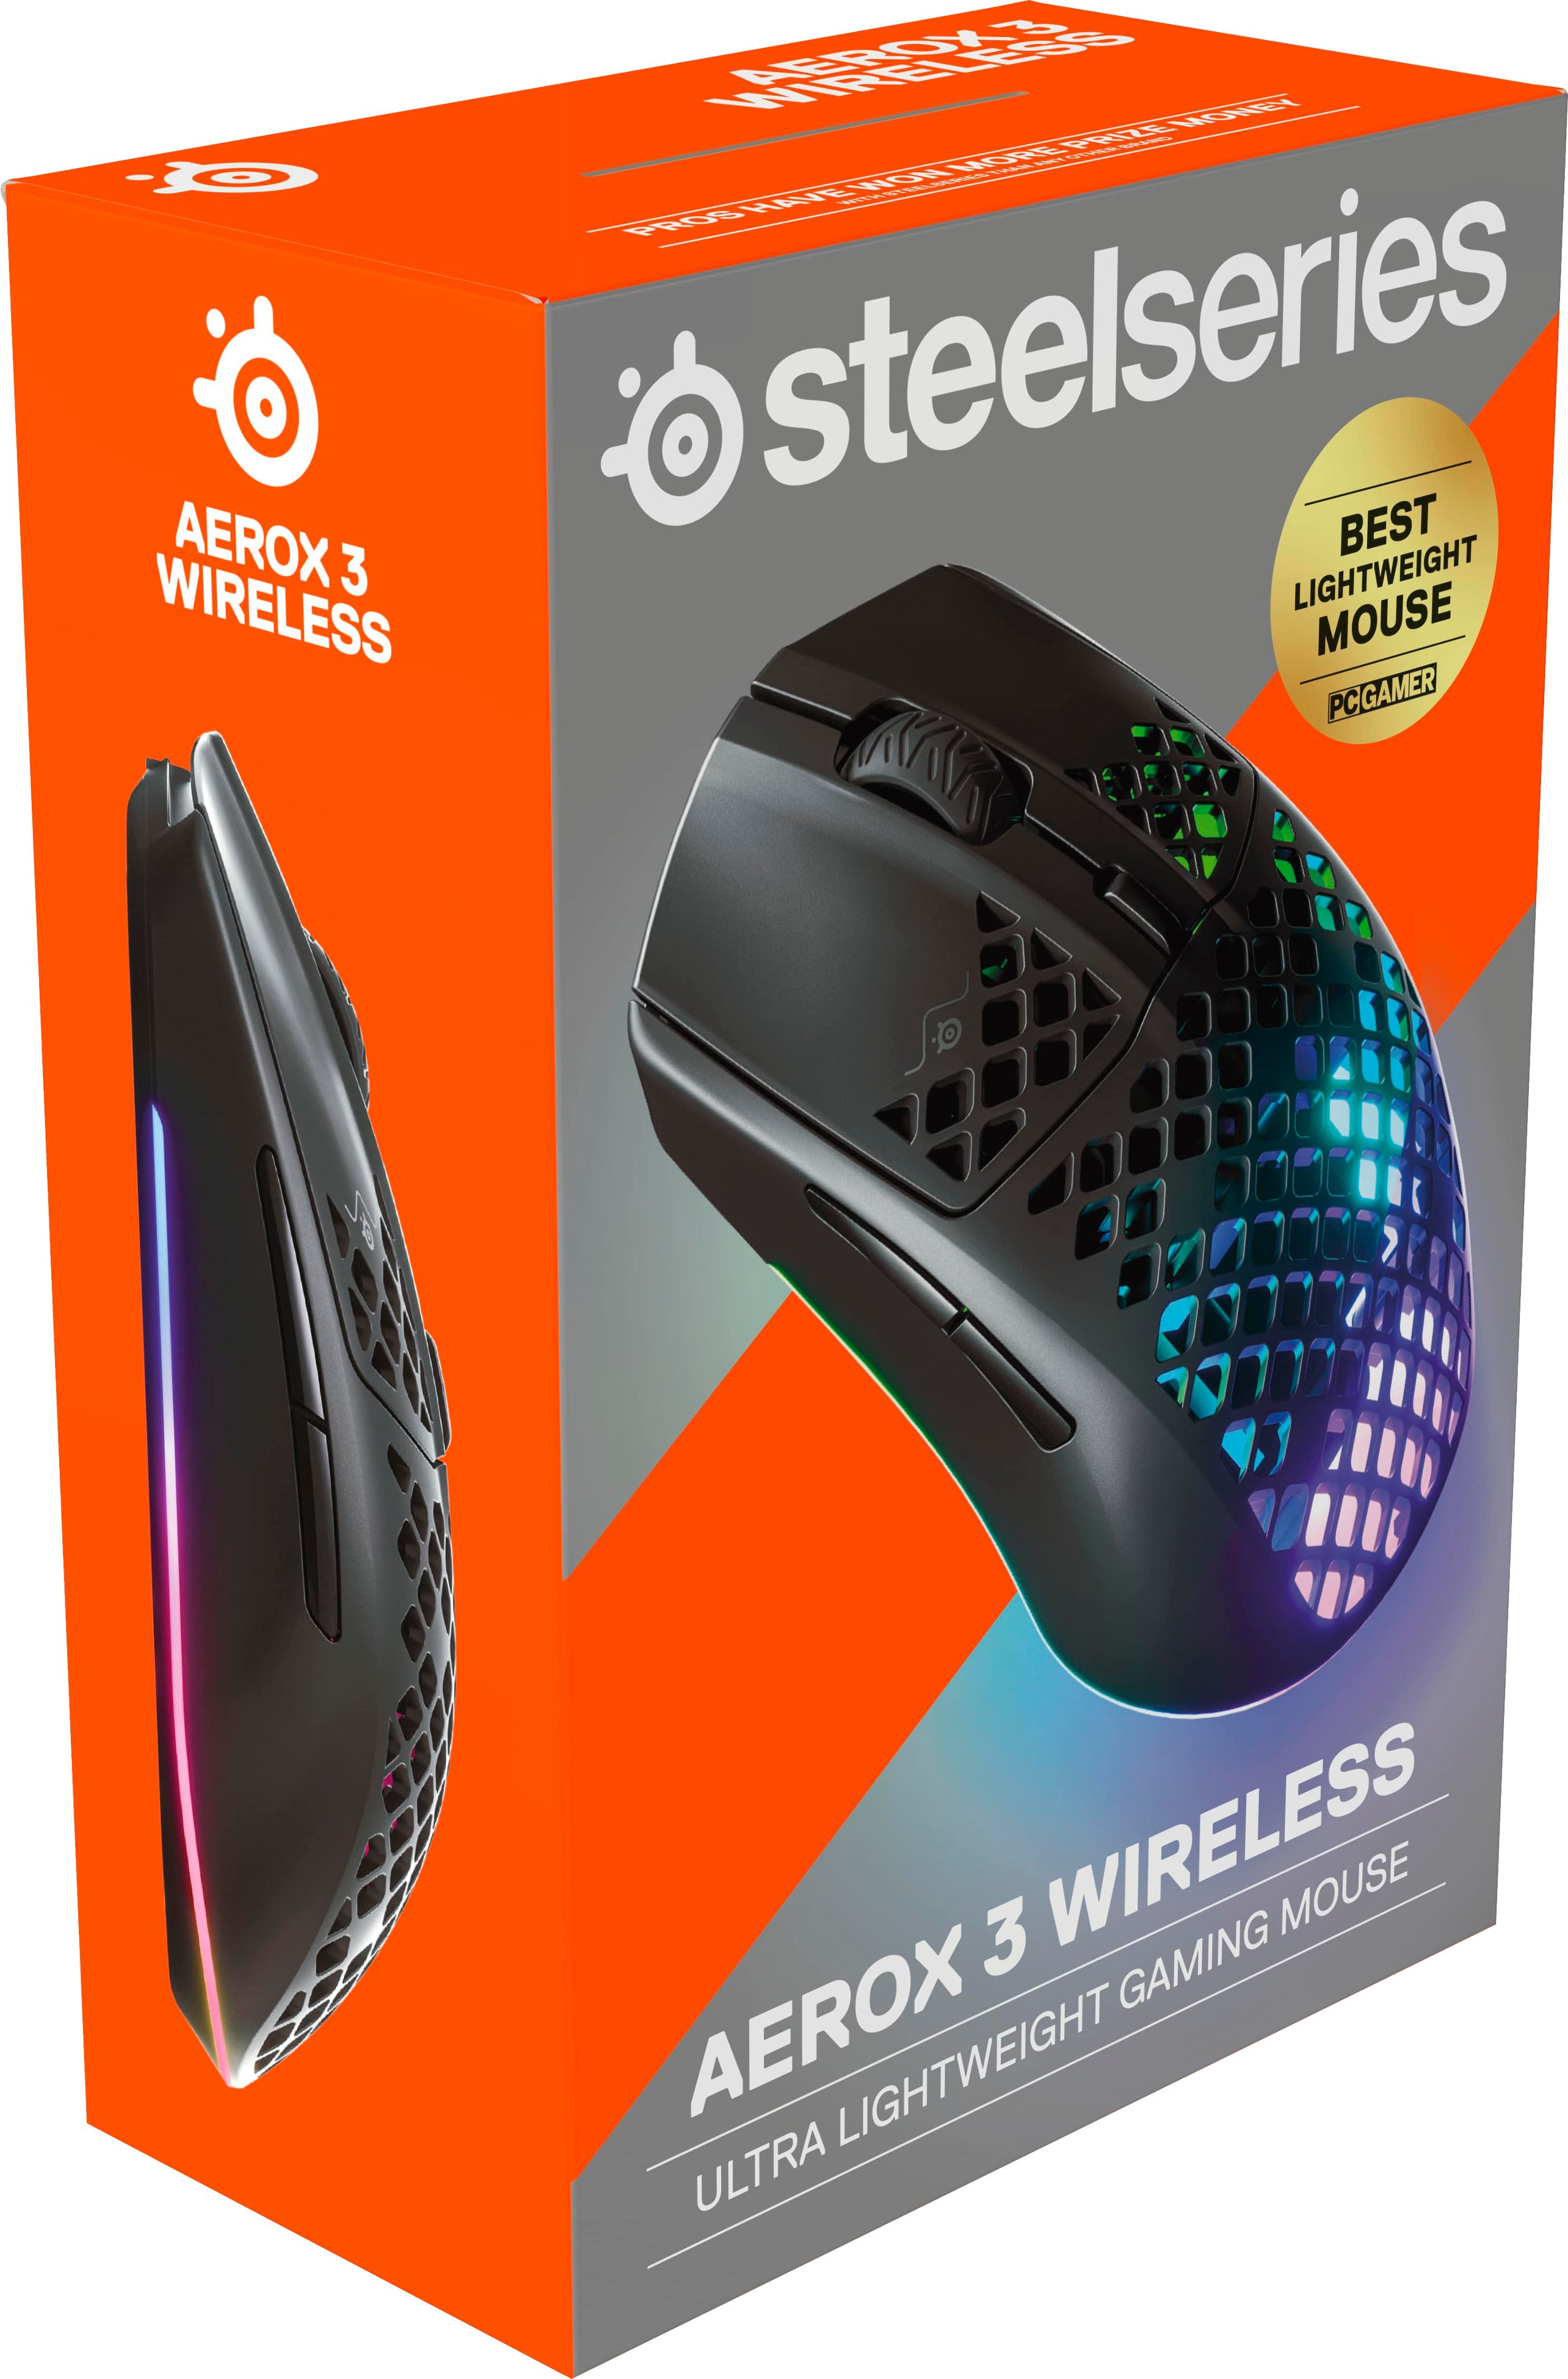 SteelSeries Ghost Collection (Apex 7 TKL + Aerox 3 Wireless) Review, Page  2 of 6